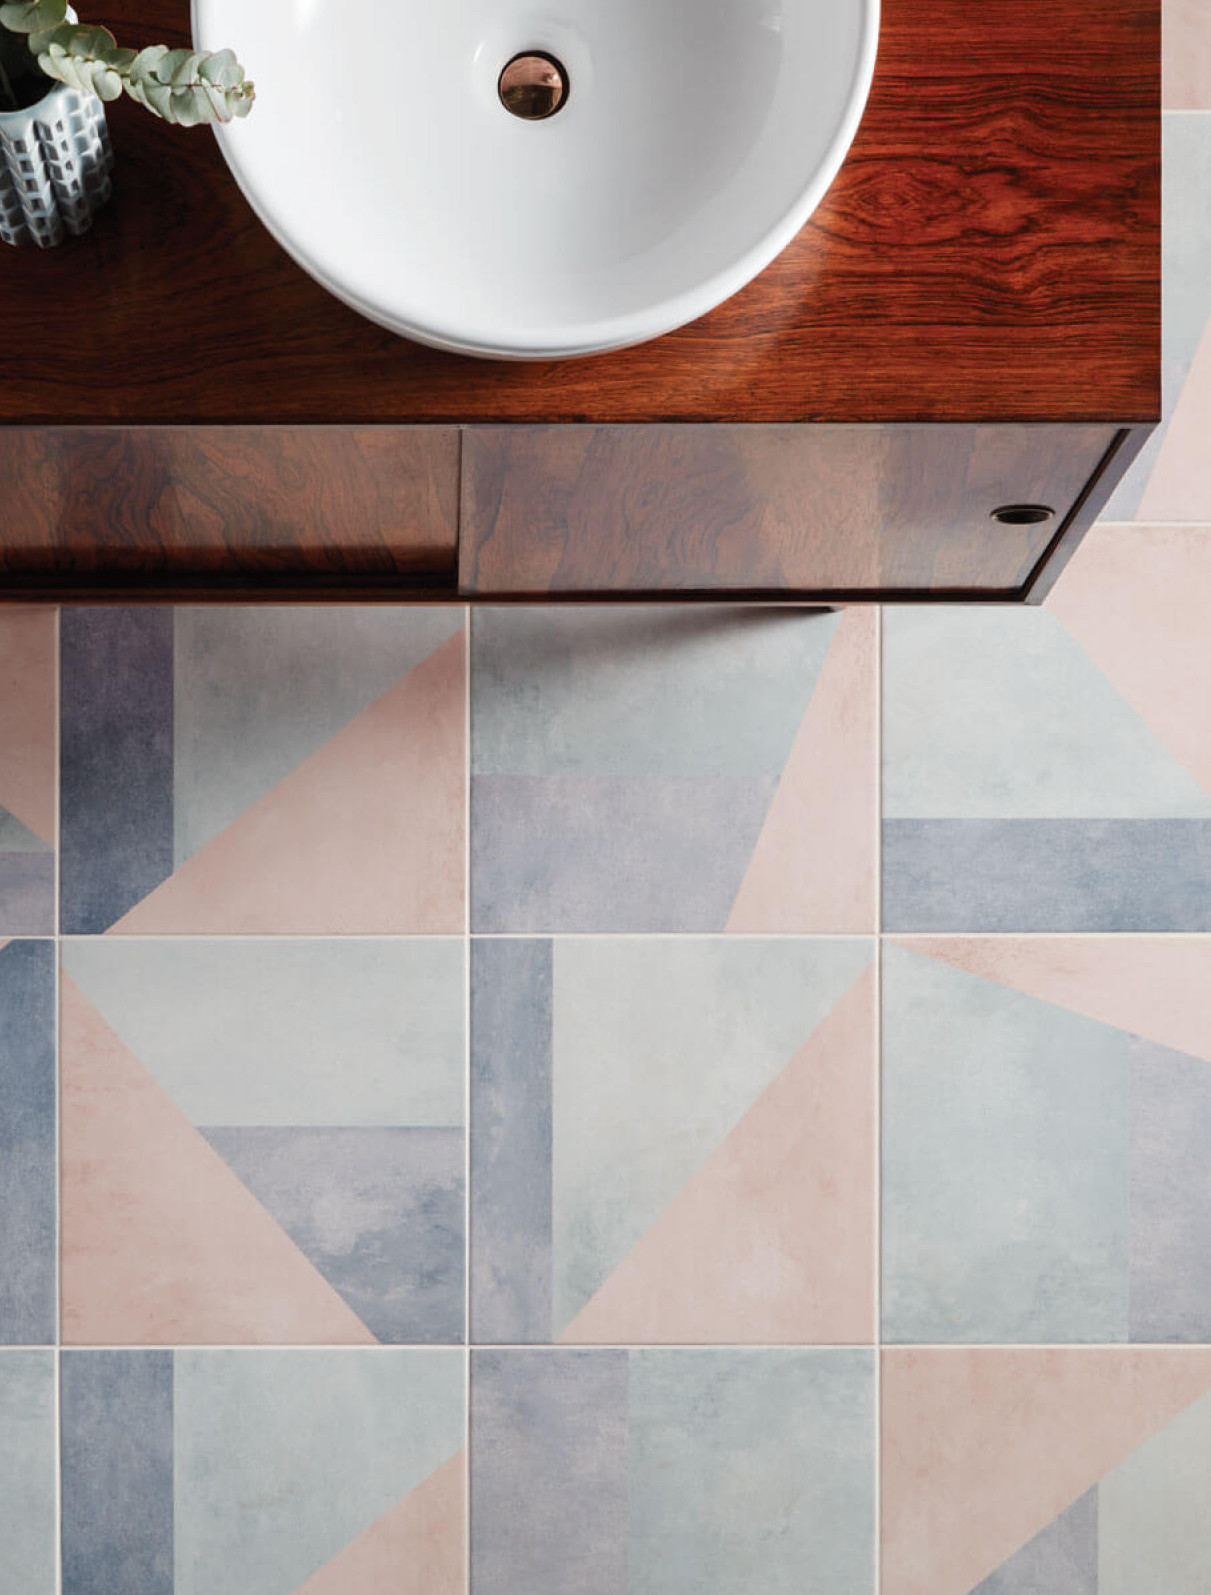 Stepped Up Pastel from British Ceramic Tile: £38.62 per m2